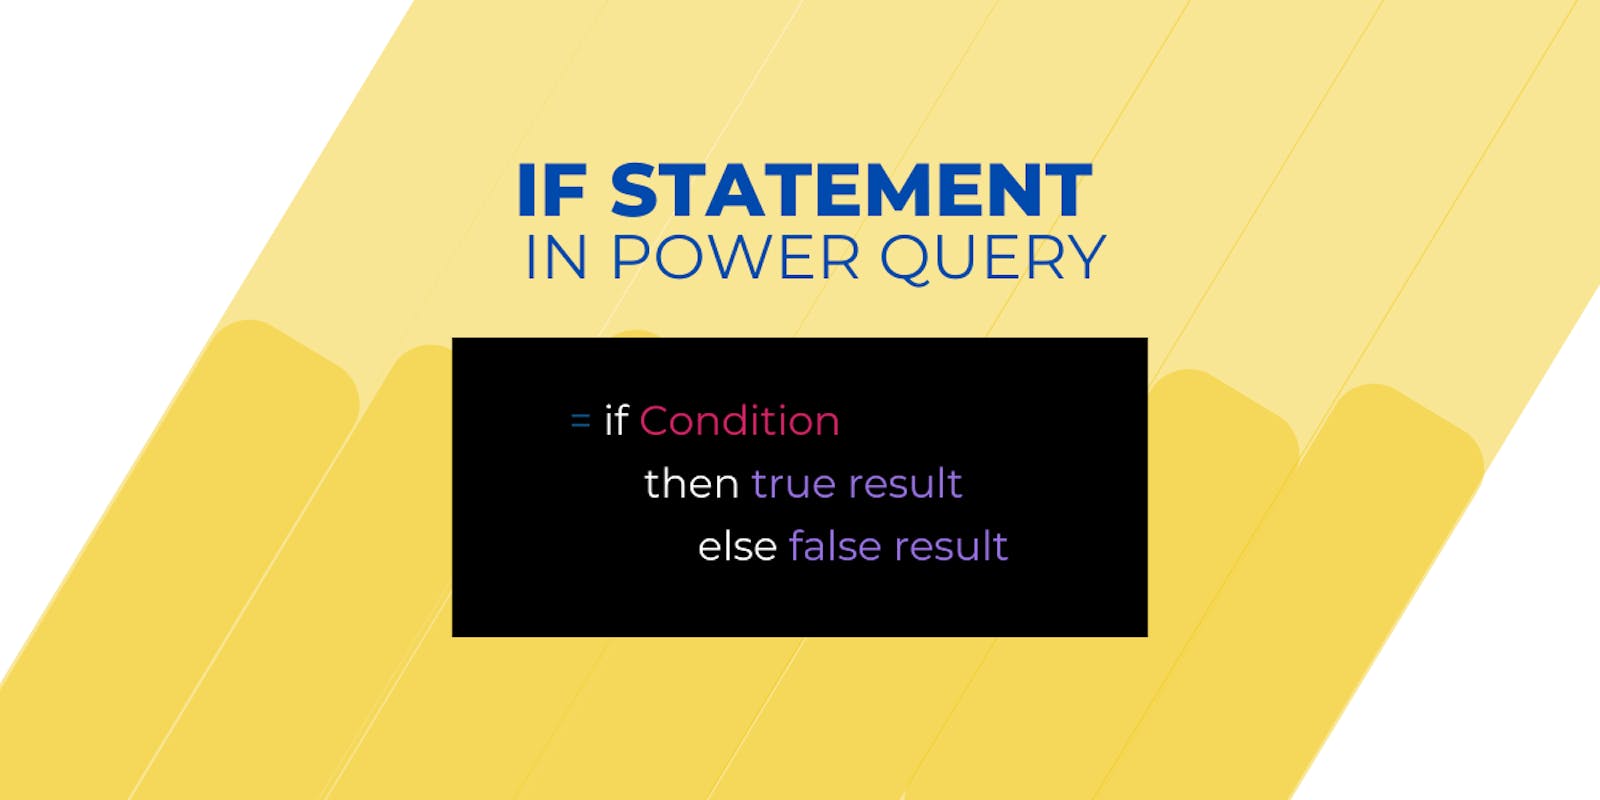 IF Statement using Power Query